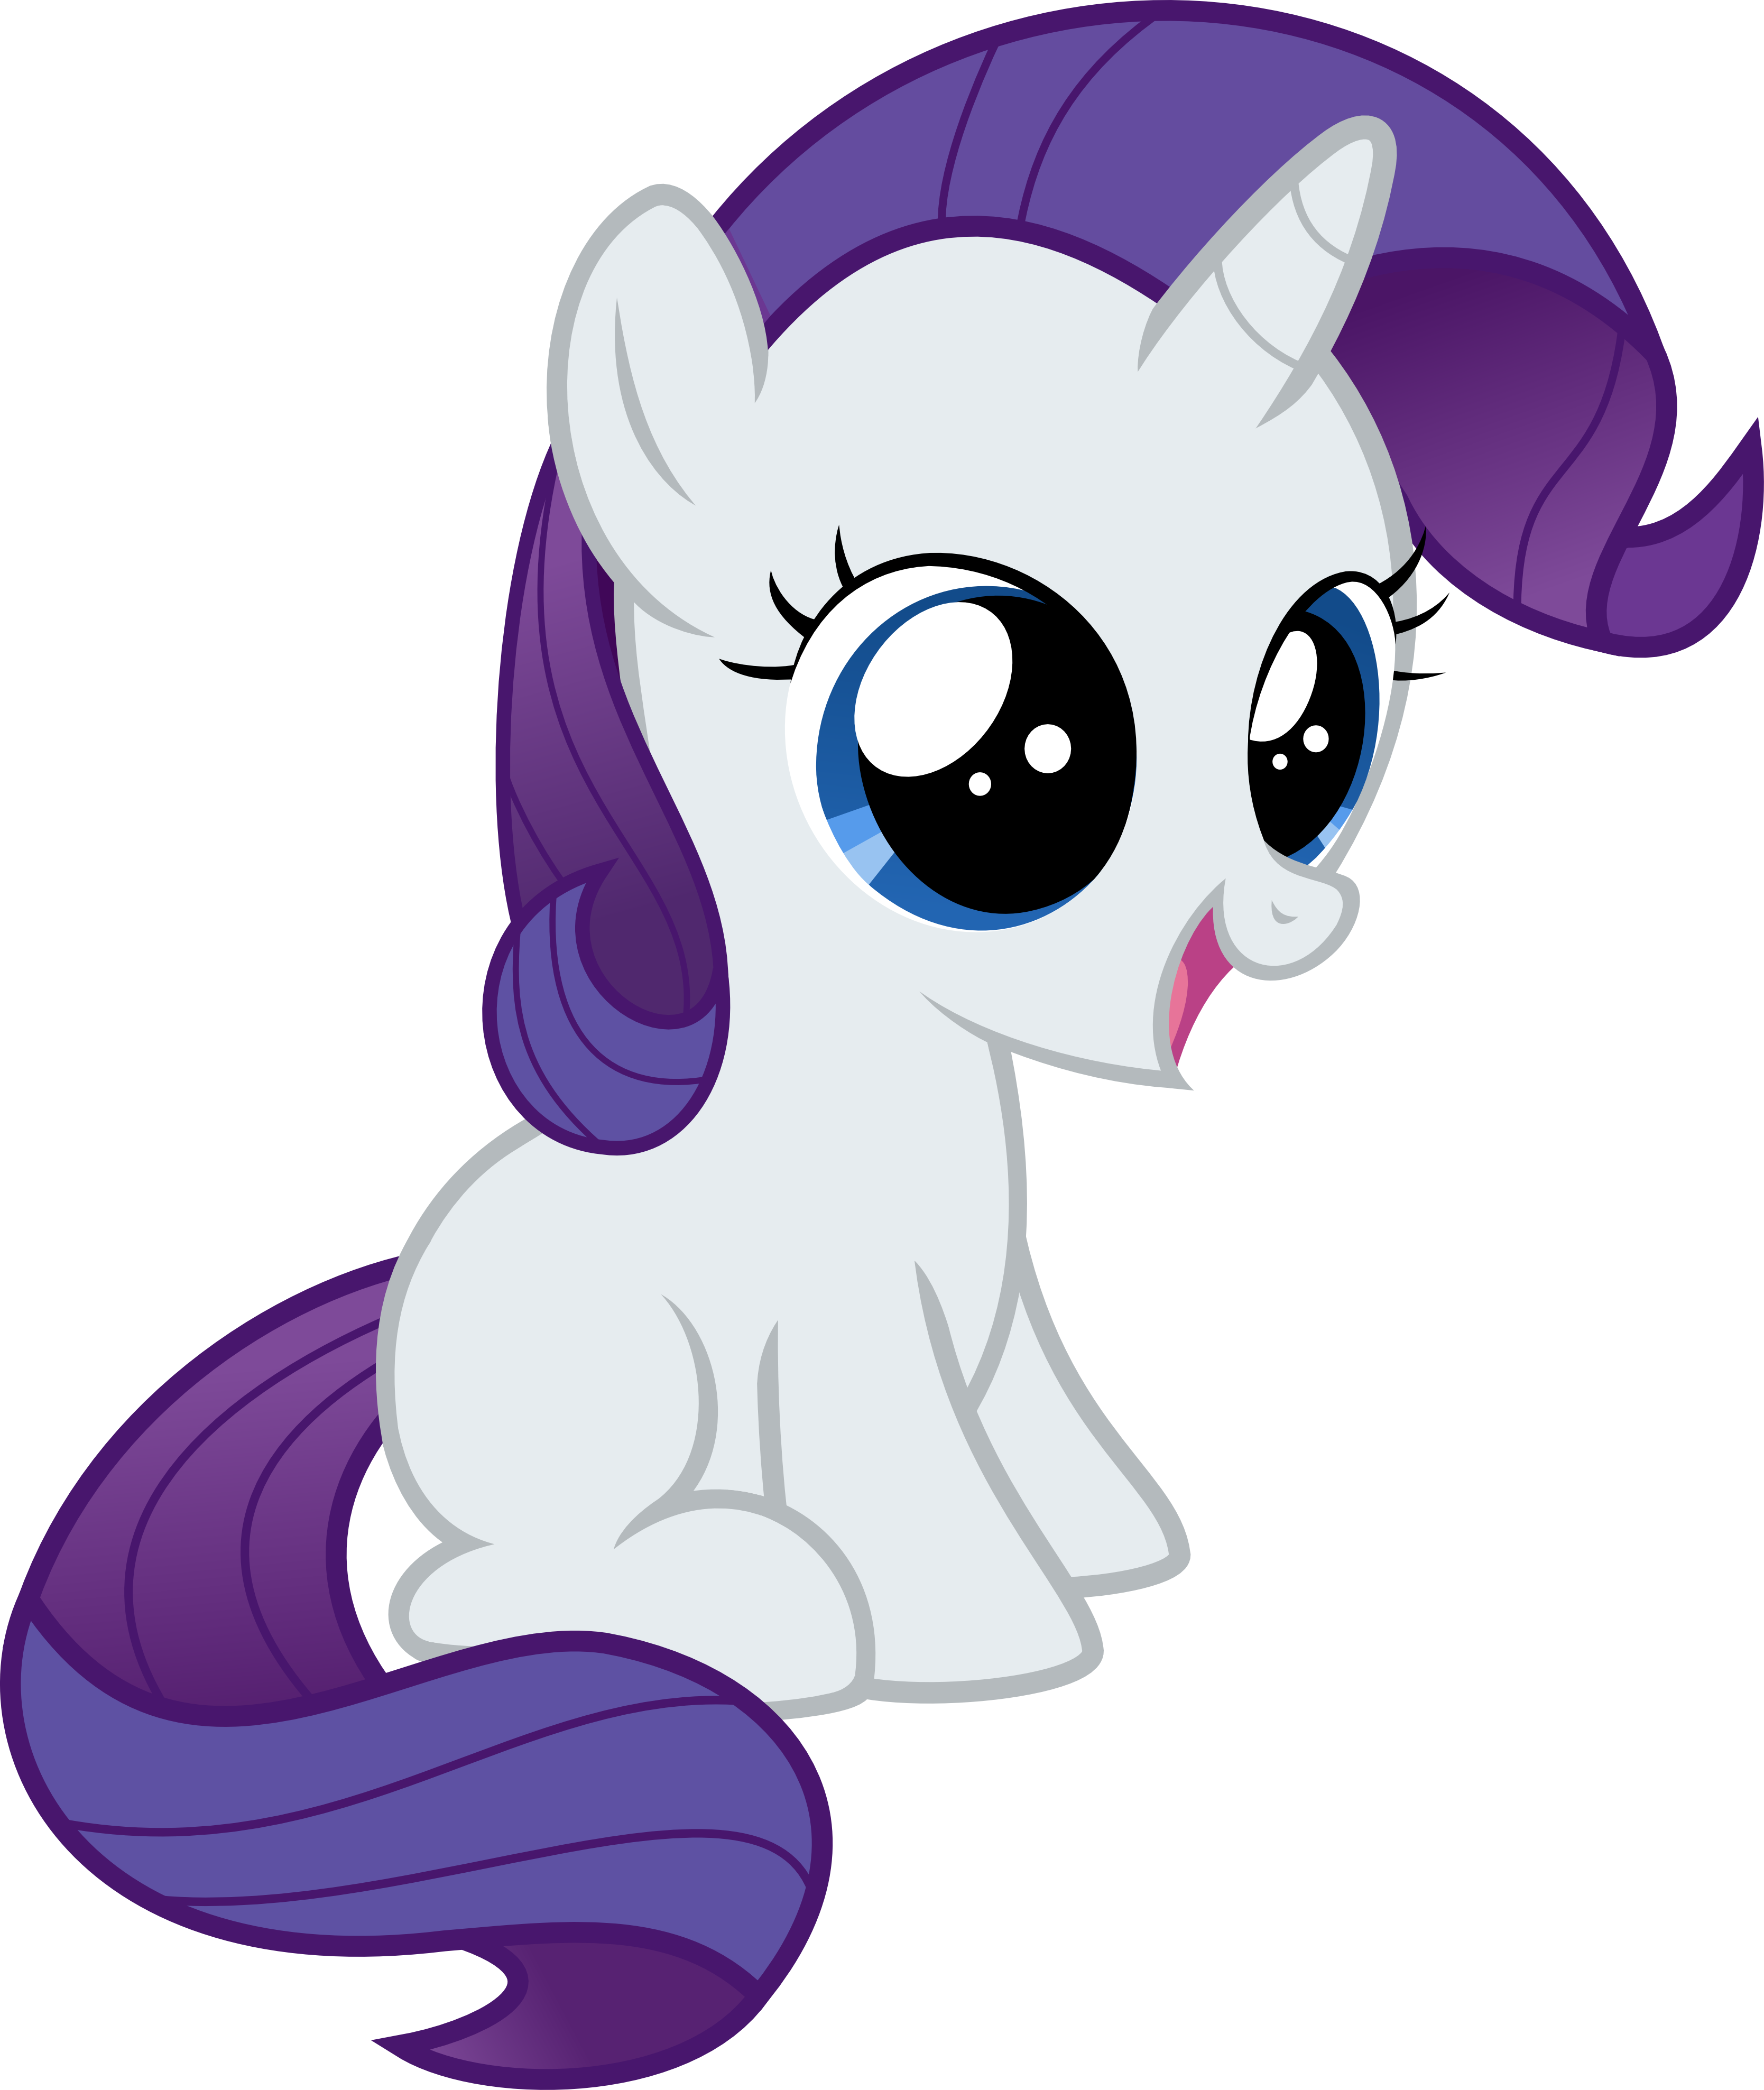 filly_rarity_vector_by_crimsonlynx97-d5qlcng.png